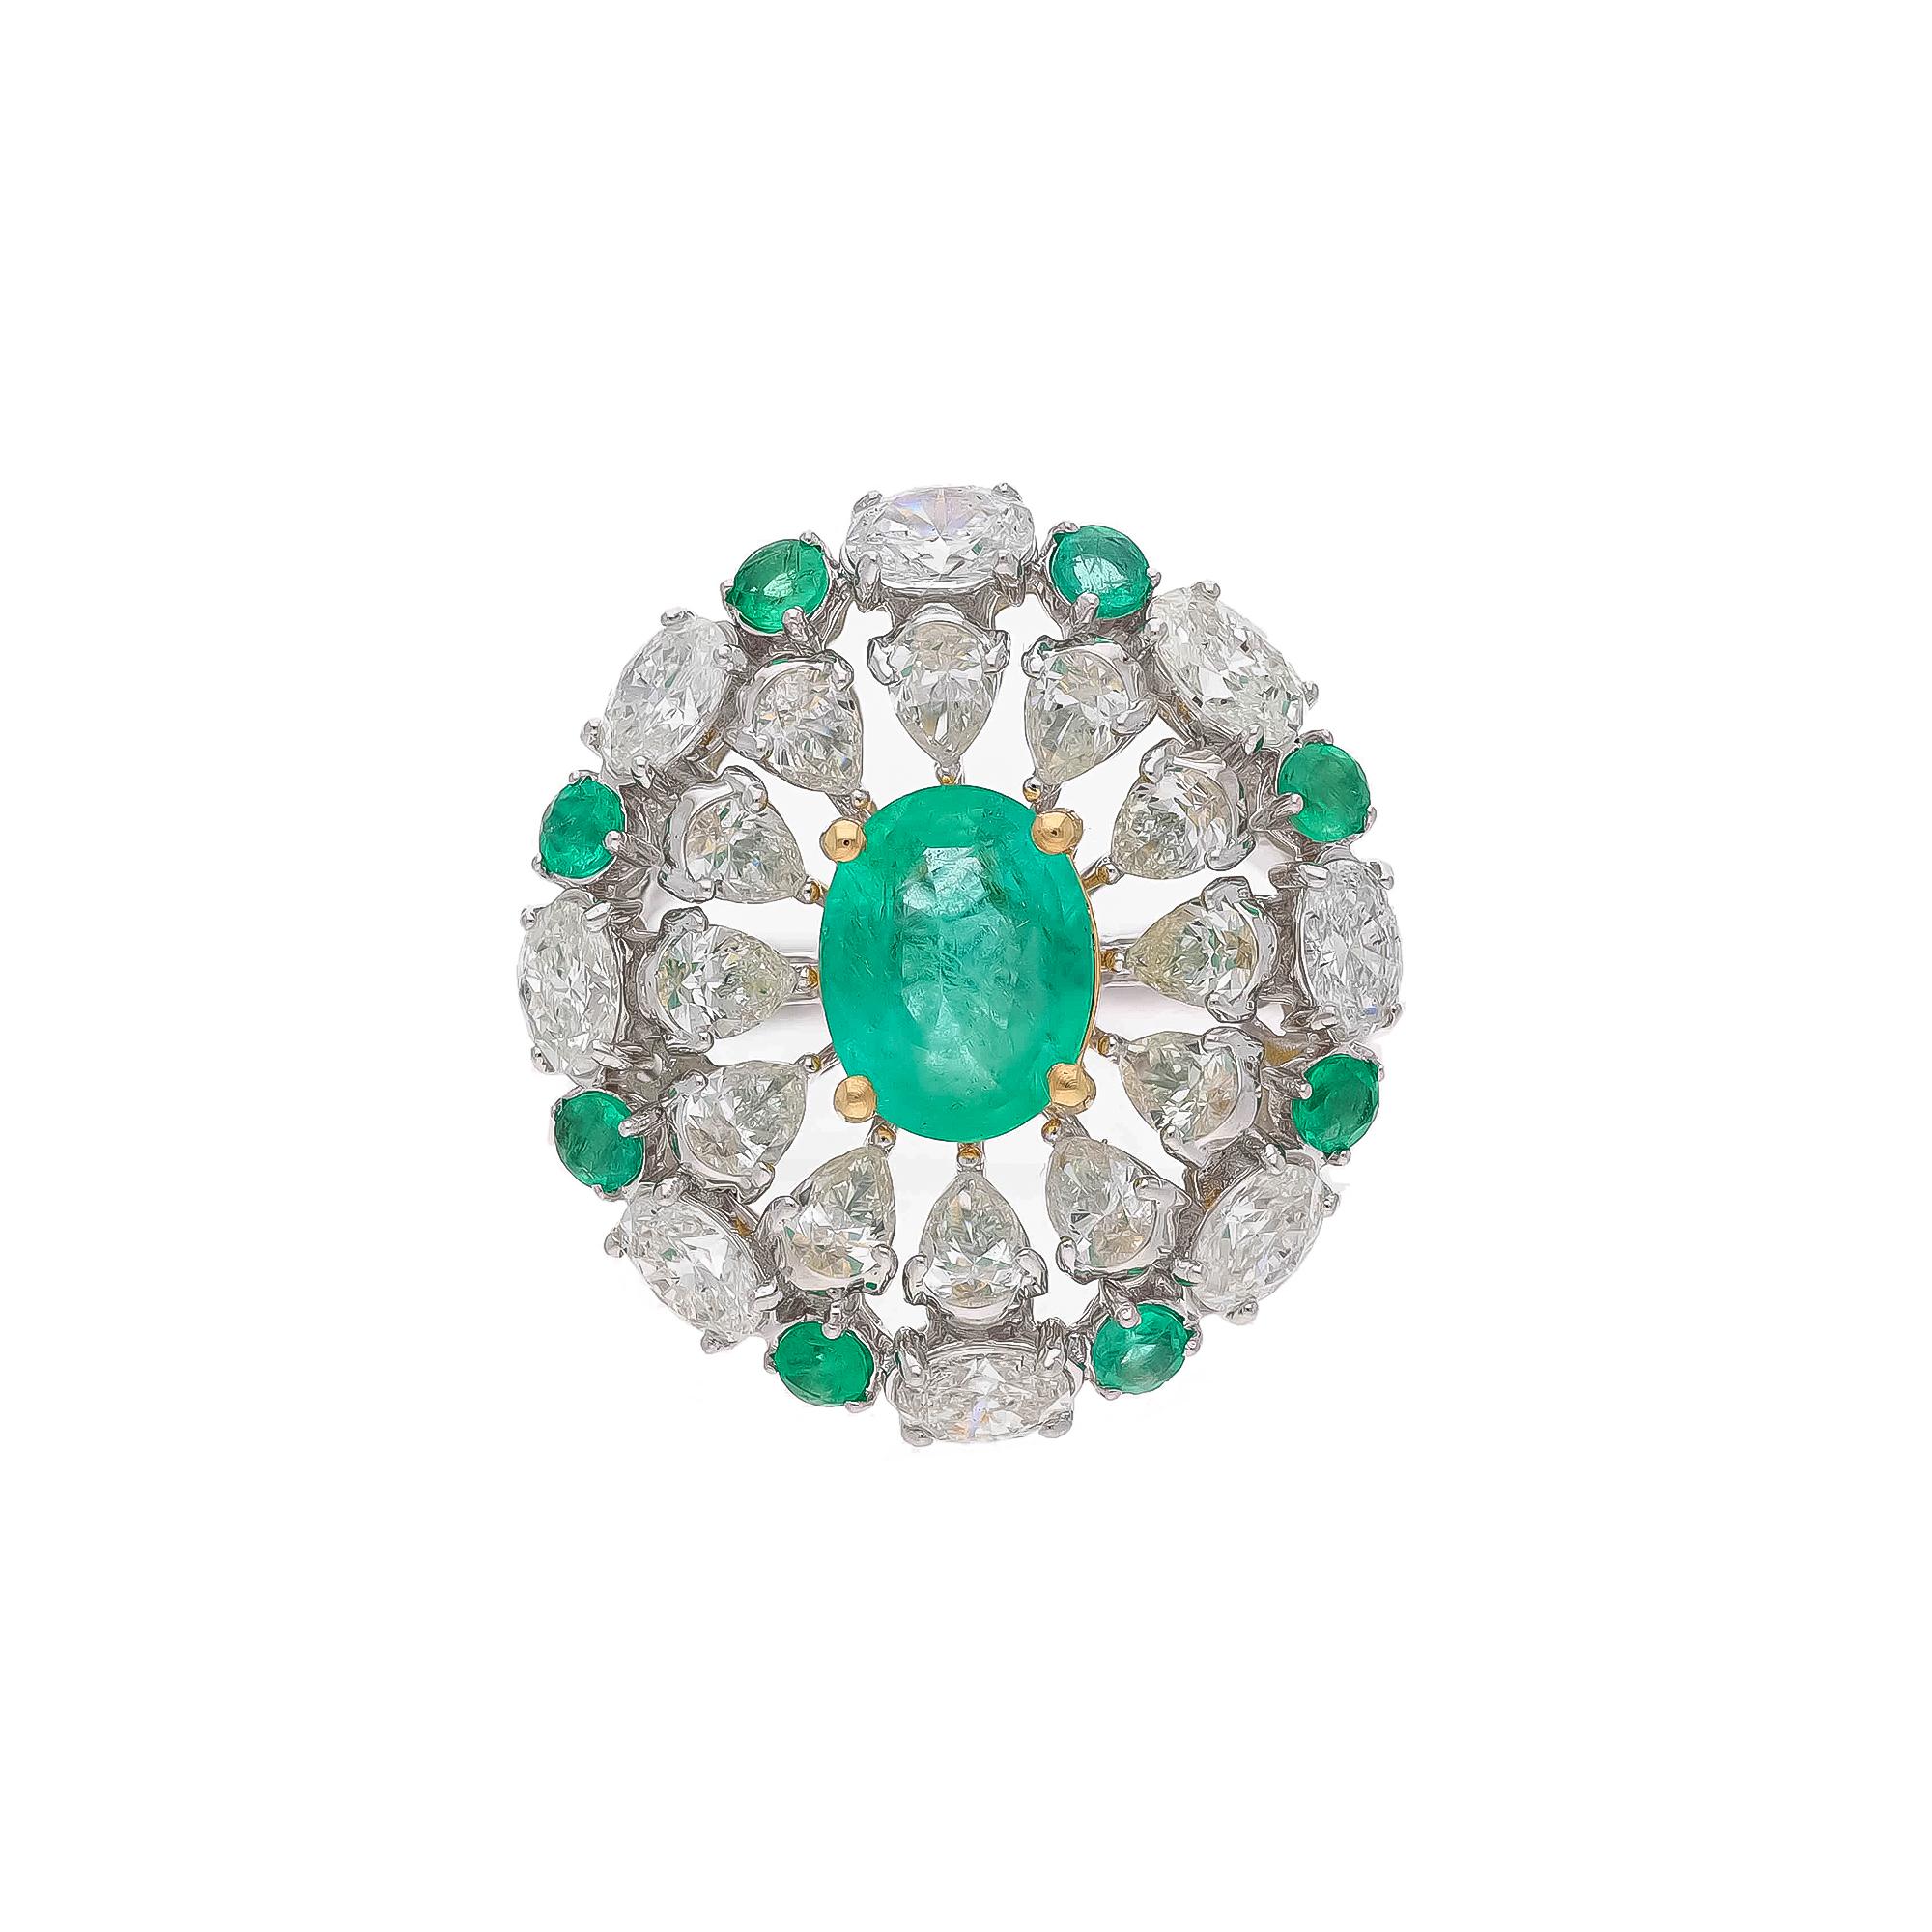 This is a natural Zambian Emerald ring with diamonds and 18k gold. The emeralds are very high quality and very good quality diamonds the clarity is vsi and G colour


Emeralds : 1.97 carats
diamonds : 3.59 carats
gold : 8.538 gms

This is a Brand